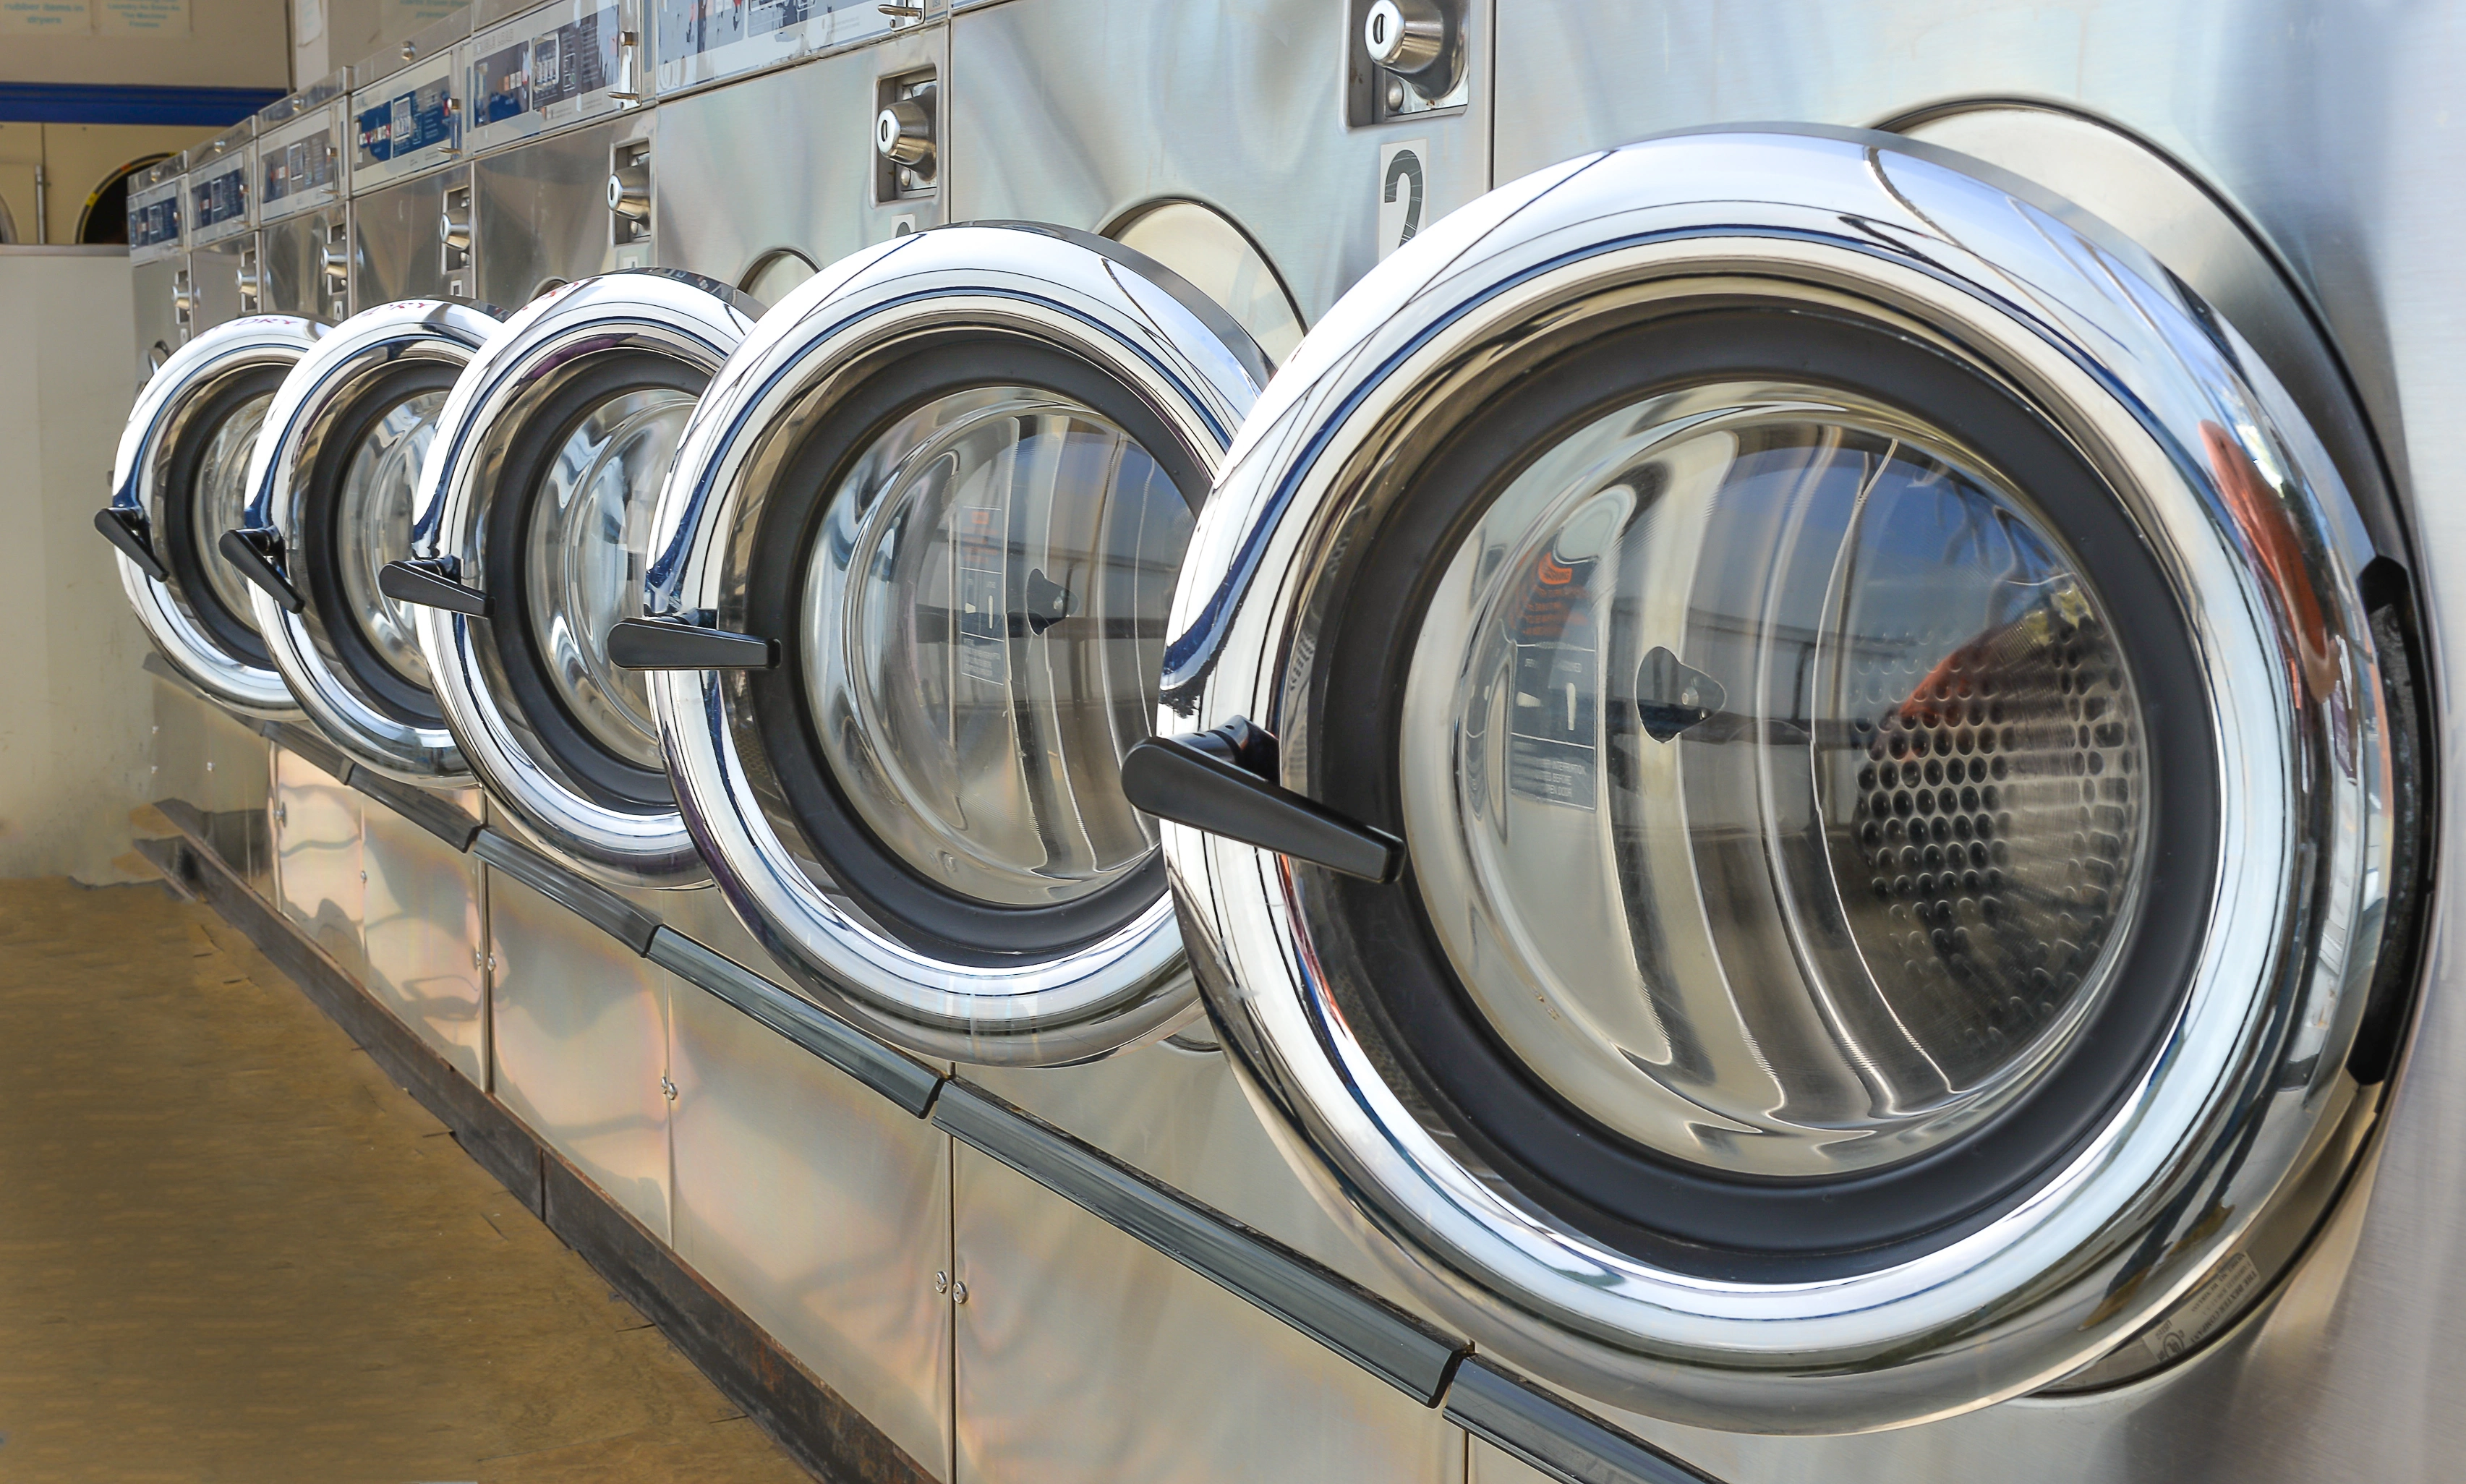 IS_Industry_Appliances_Applications_Commerciallaundry